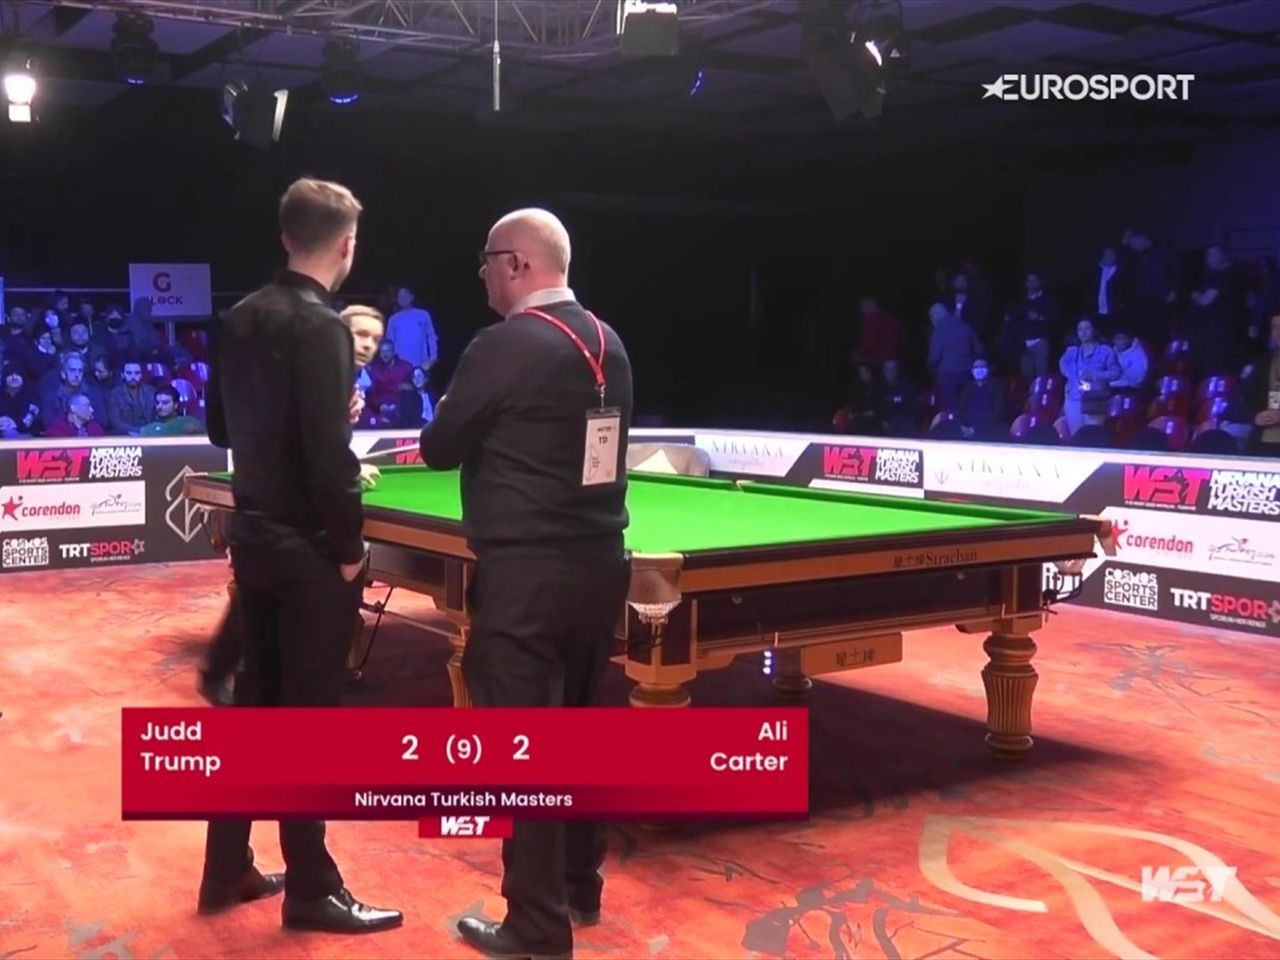 Table problem between Trump and Carter at Turkish Masters - Snooker video